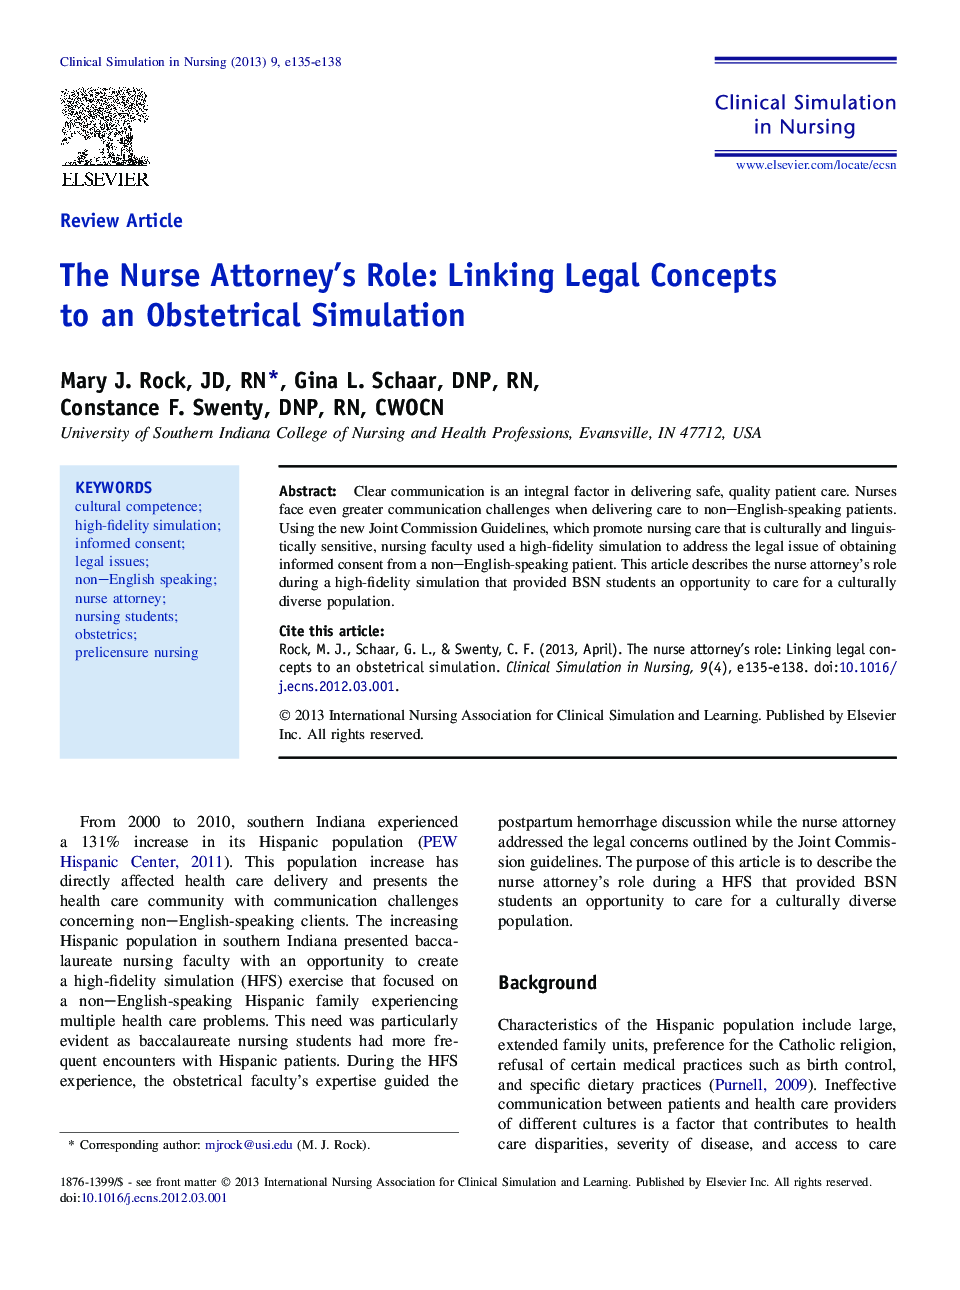 The Nurse Attorney's Role: Linking Legal Concepts to an Obstetrical Simulation